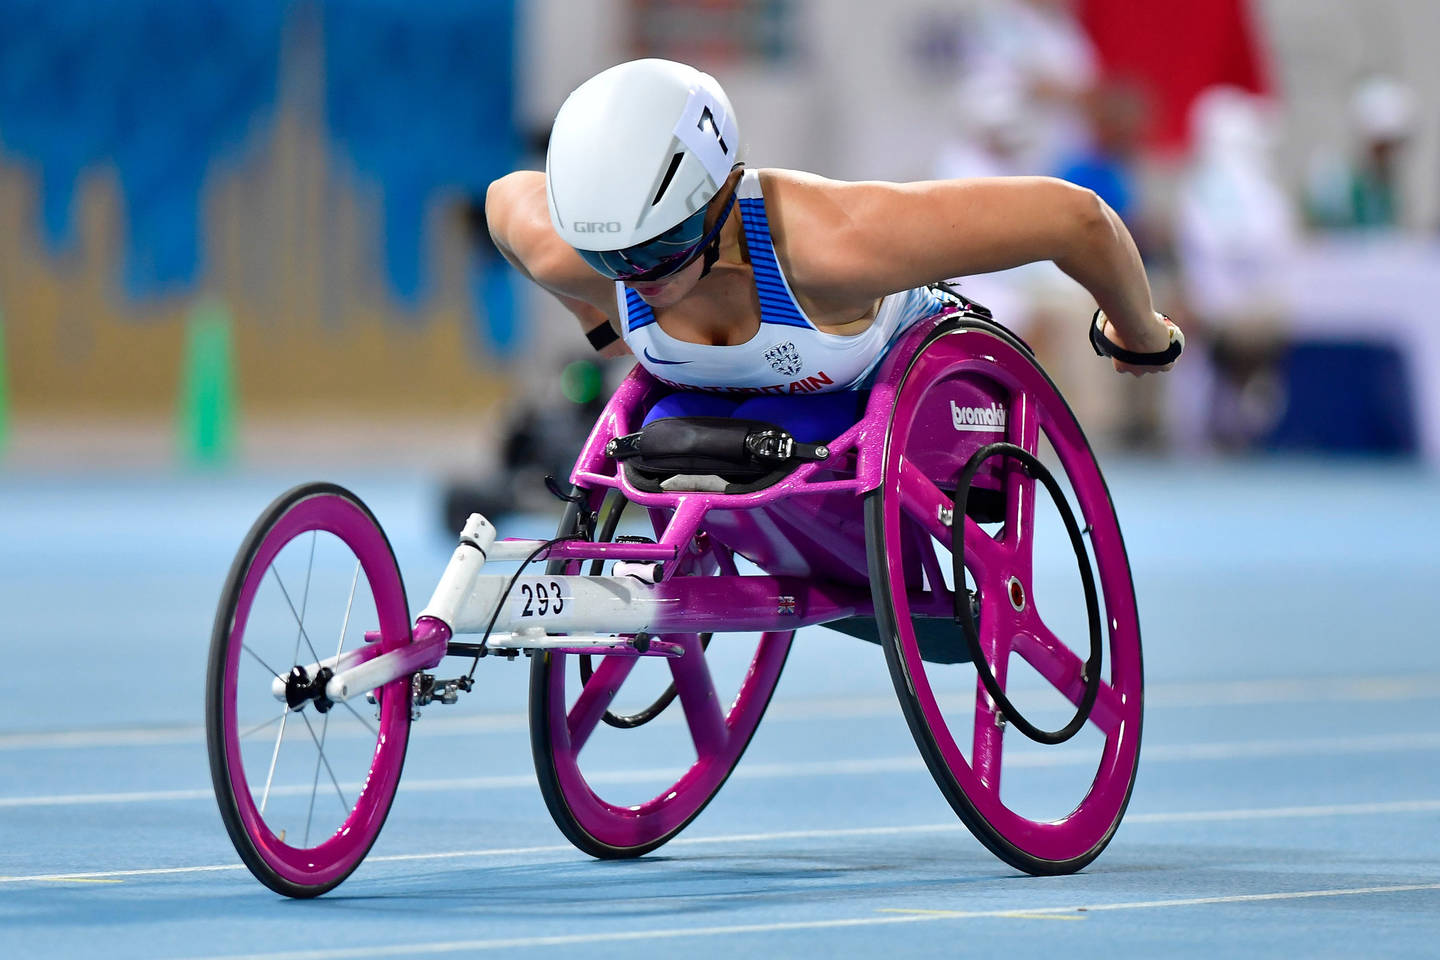 Sammi Kinghorn in her race at Worlds 2019